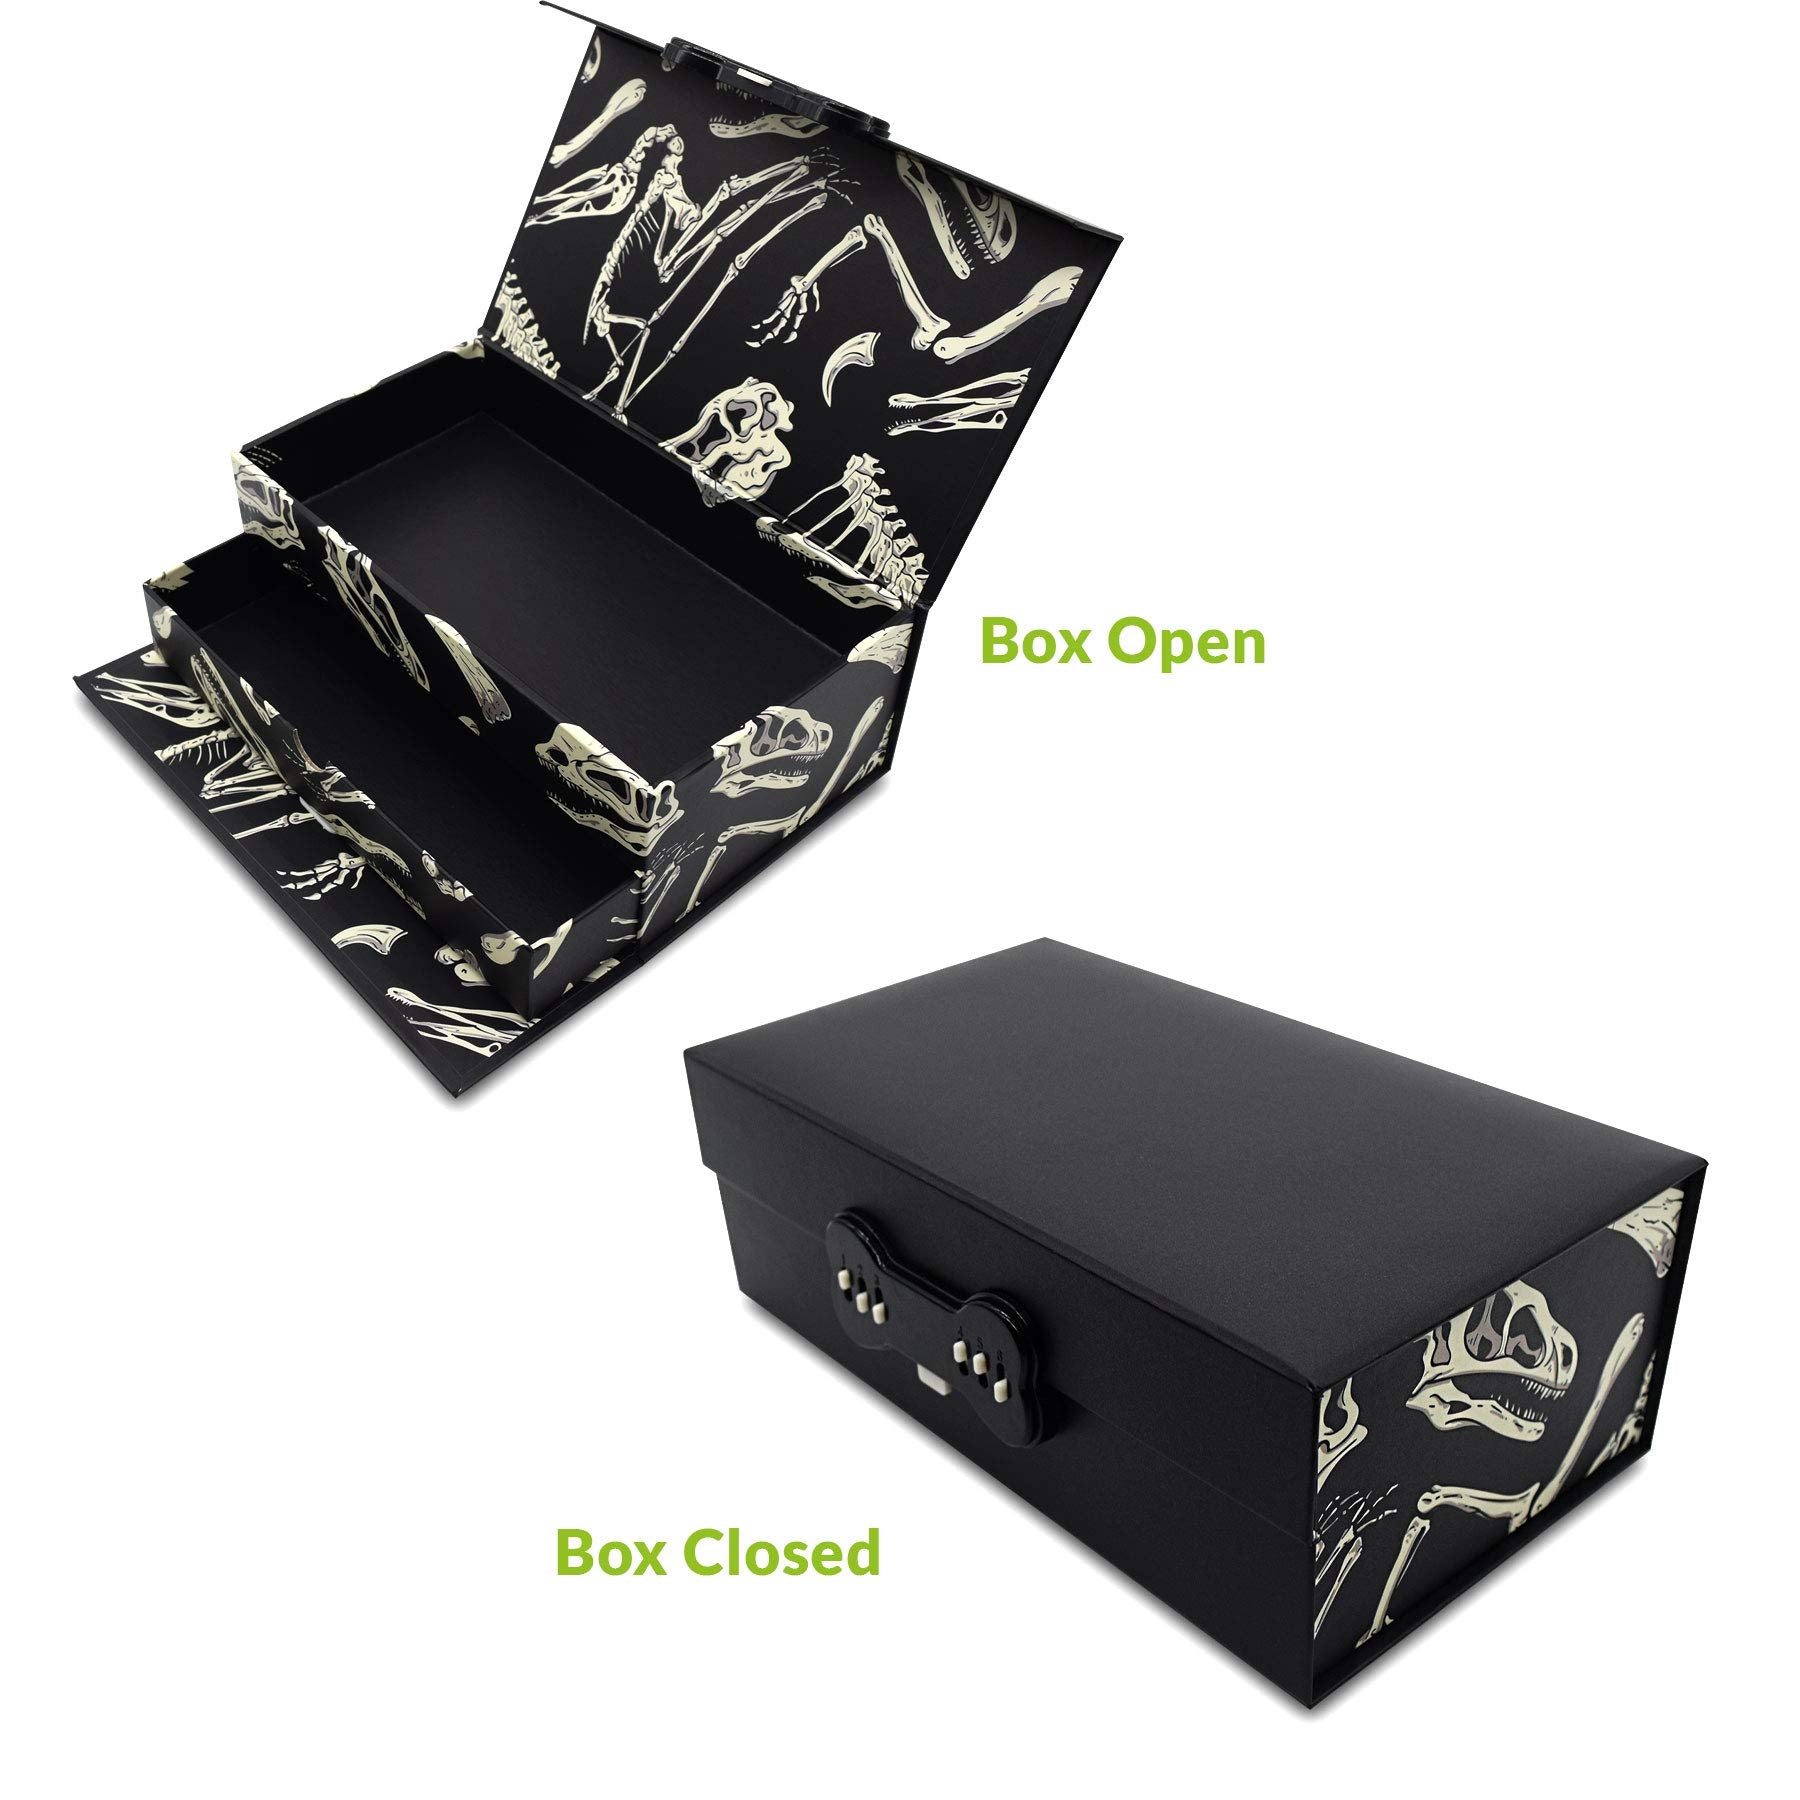 Kids Safe Box - Keepsake Paper Box for Boys, Safe With Combination Code Lock, Treasure Chest with Drawer, for Cash, Cards, Jewelery, Valuables, Storage, Toys, Organizing, Dinosaur Print - 9.5x5.25x3.5  - Like New